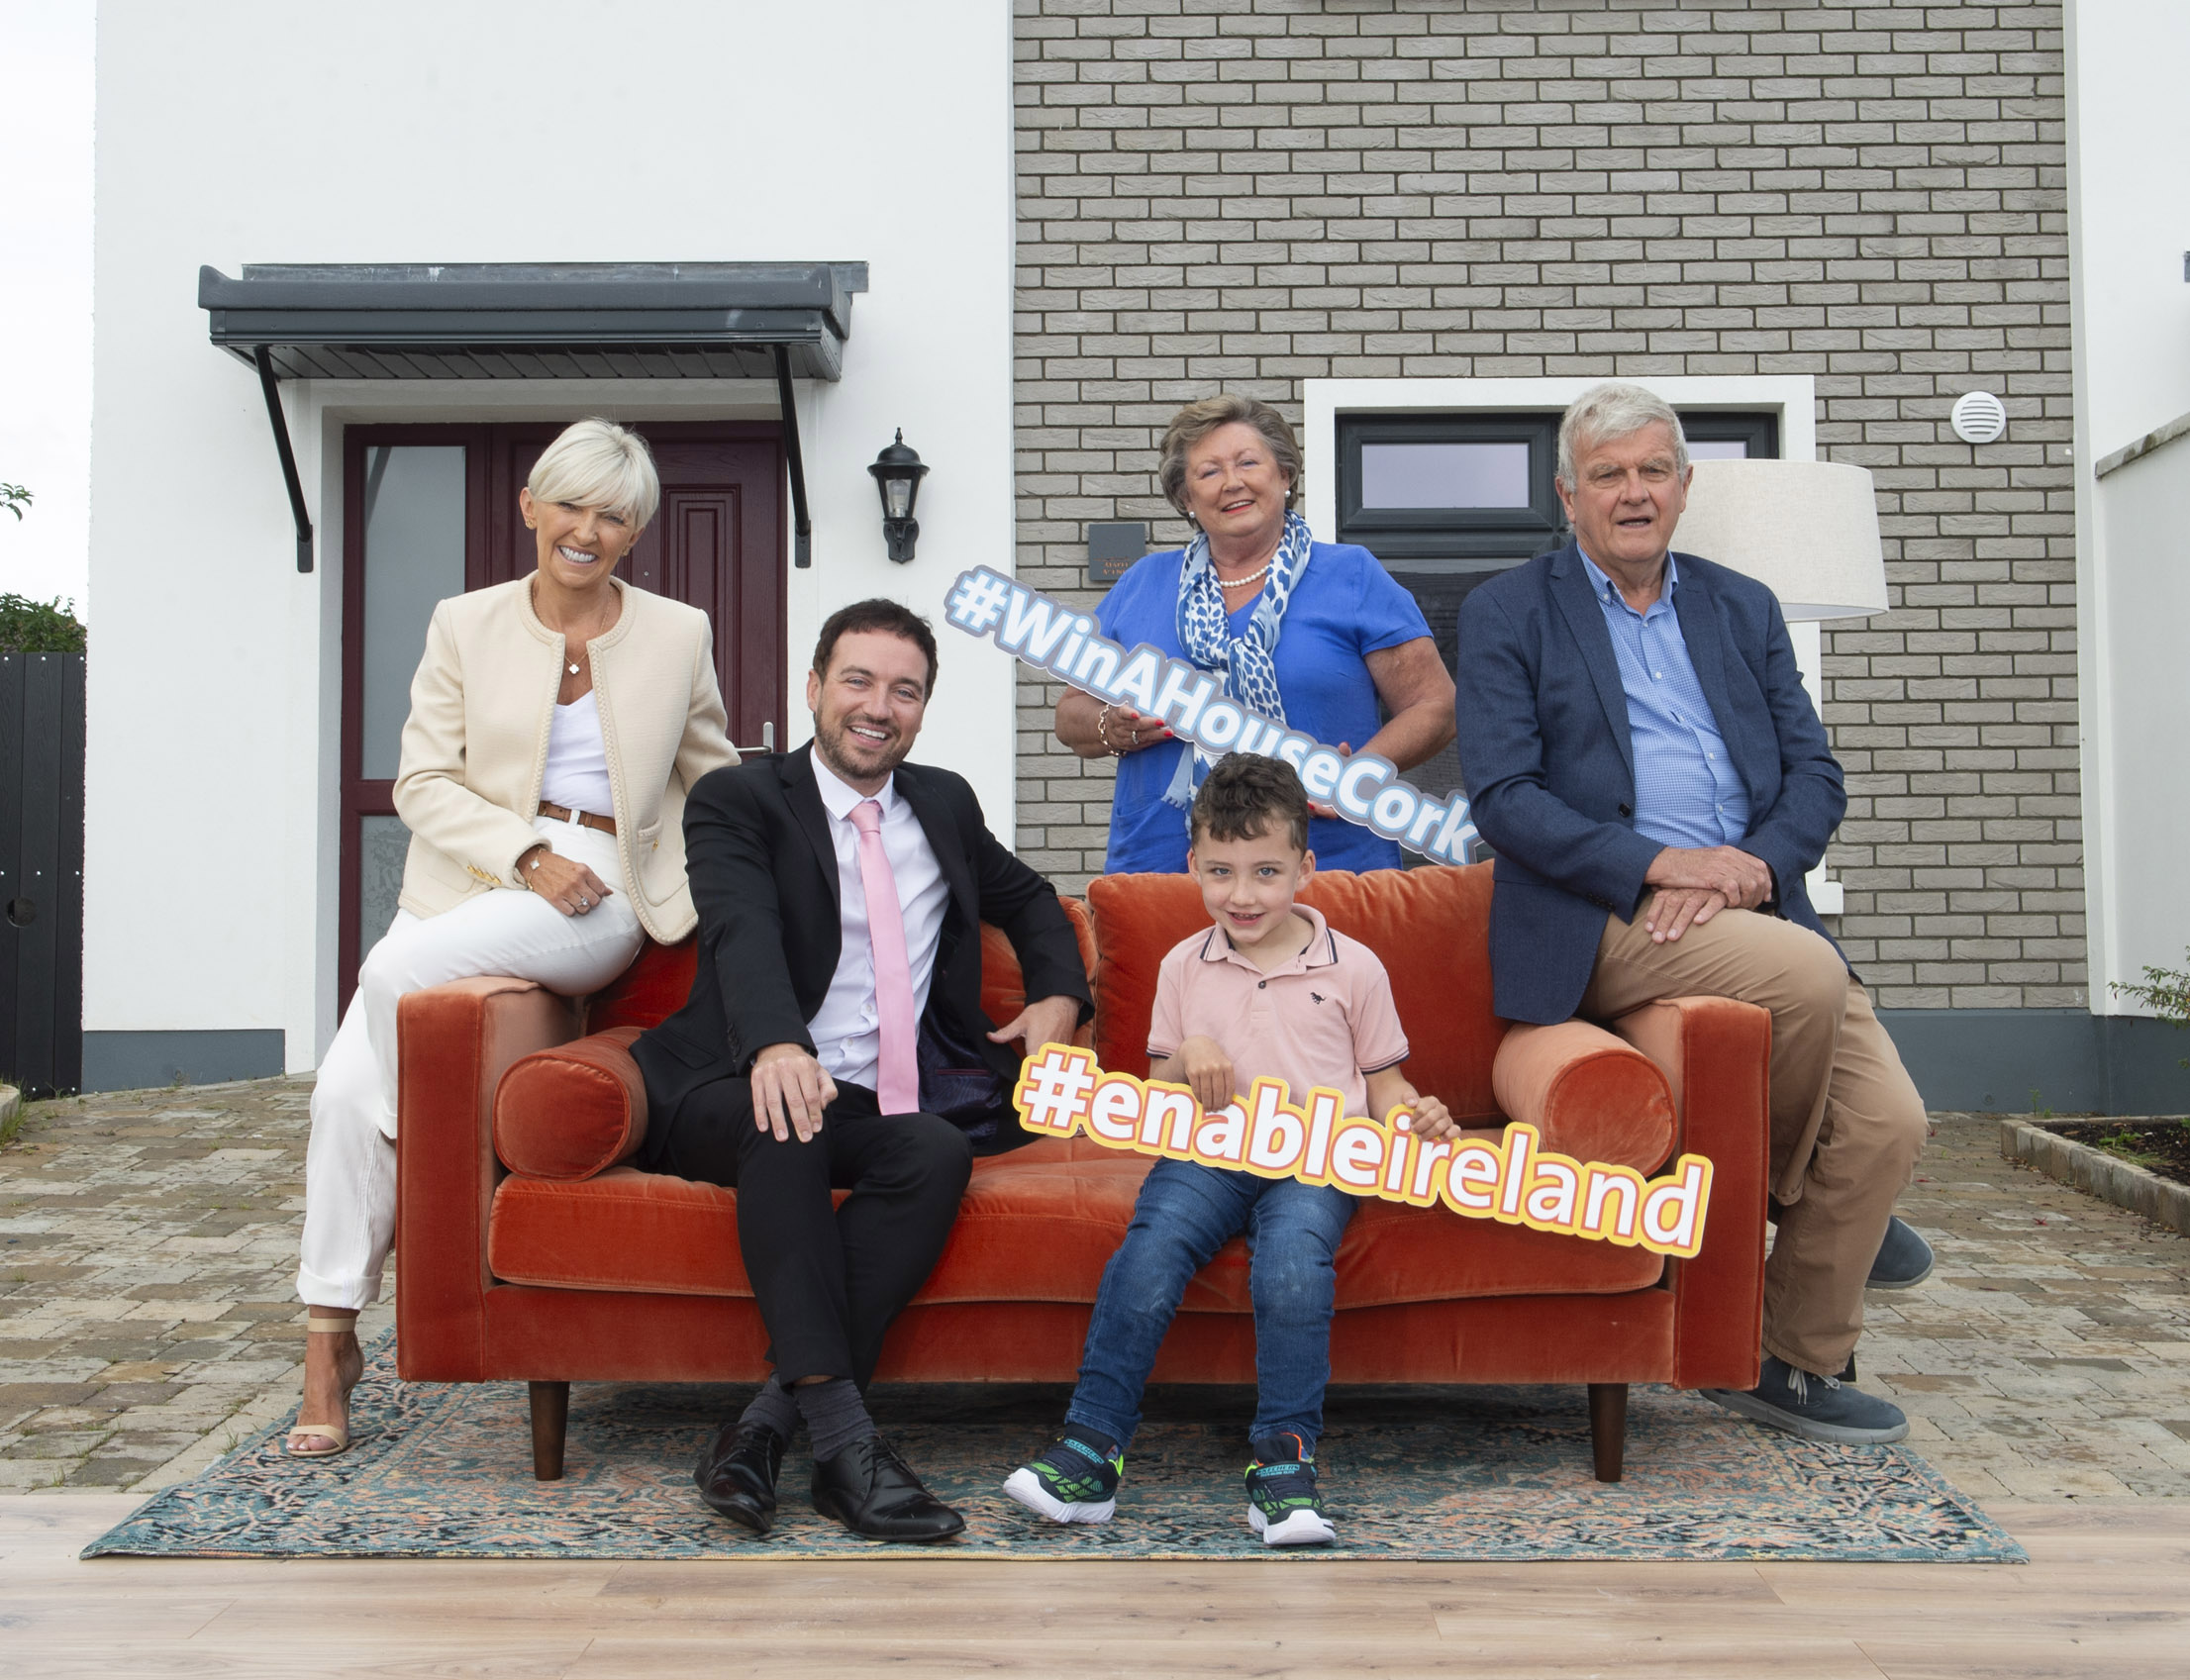 Four adults and a child sit on a couch in front of a house. They hold signs saying #winahouse and #enableireland